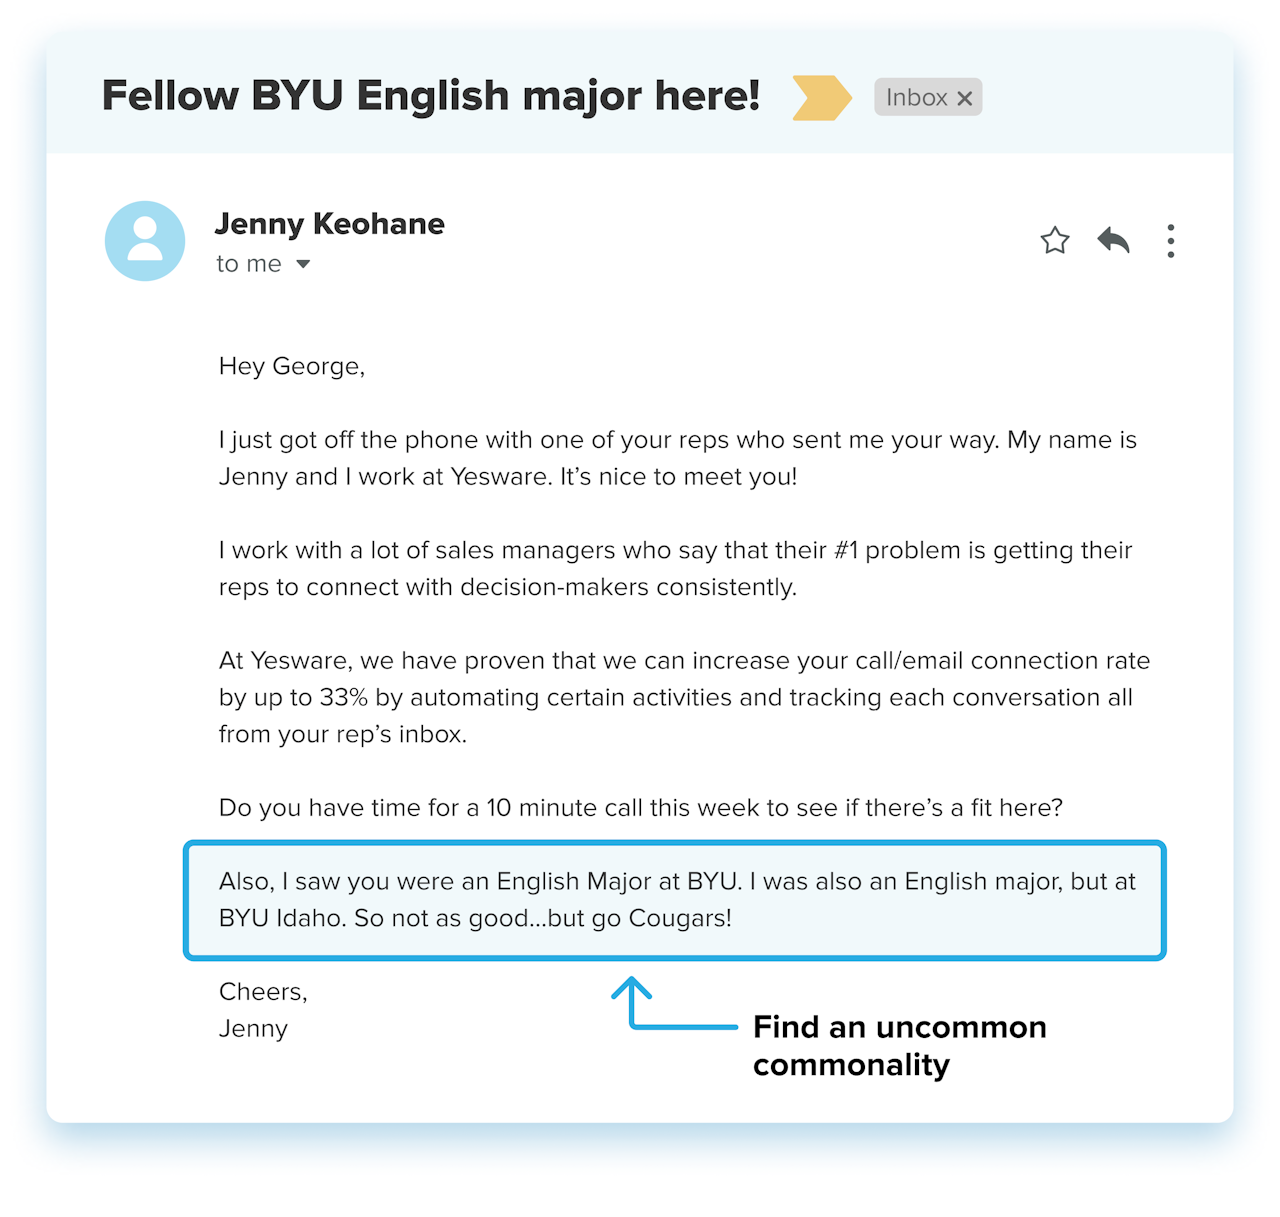 personalized email example: uncommon commonality